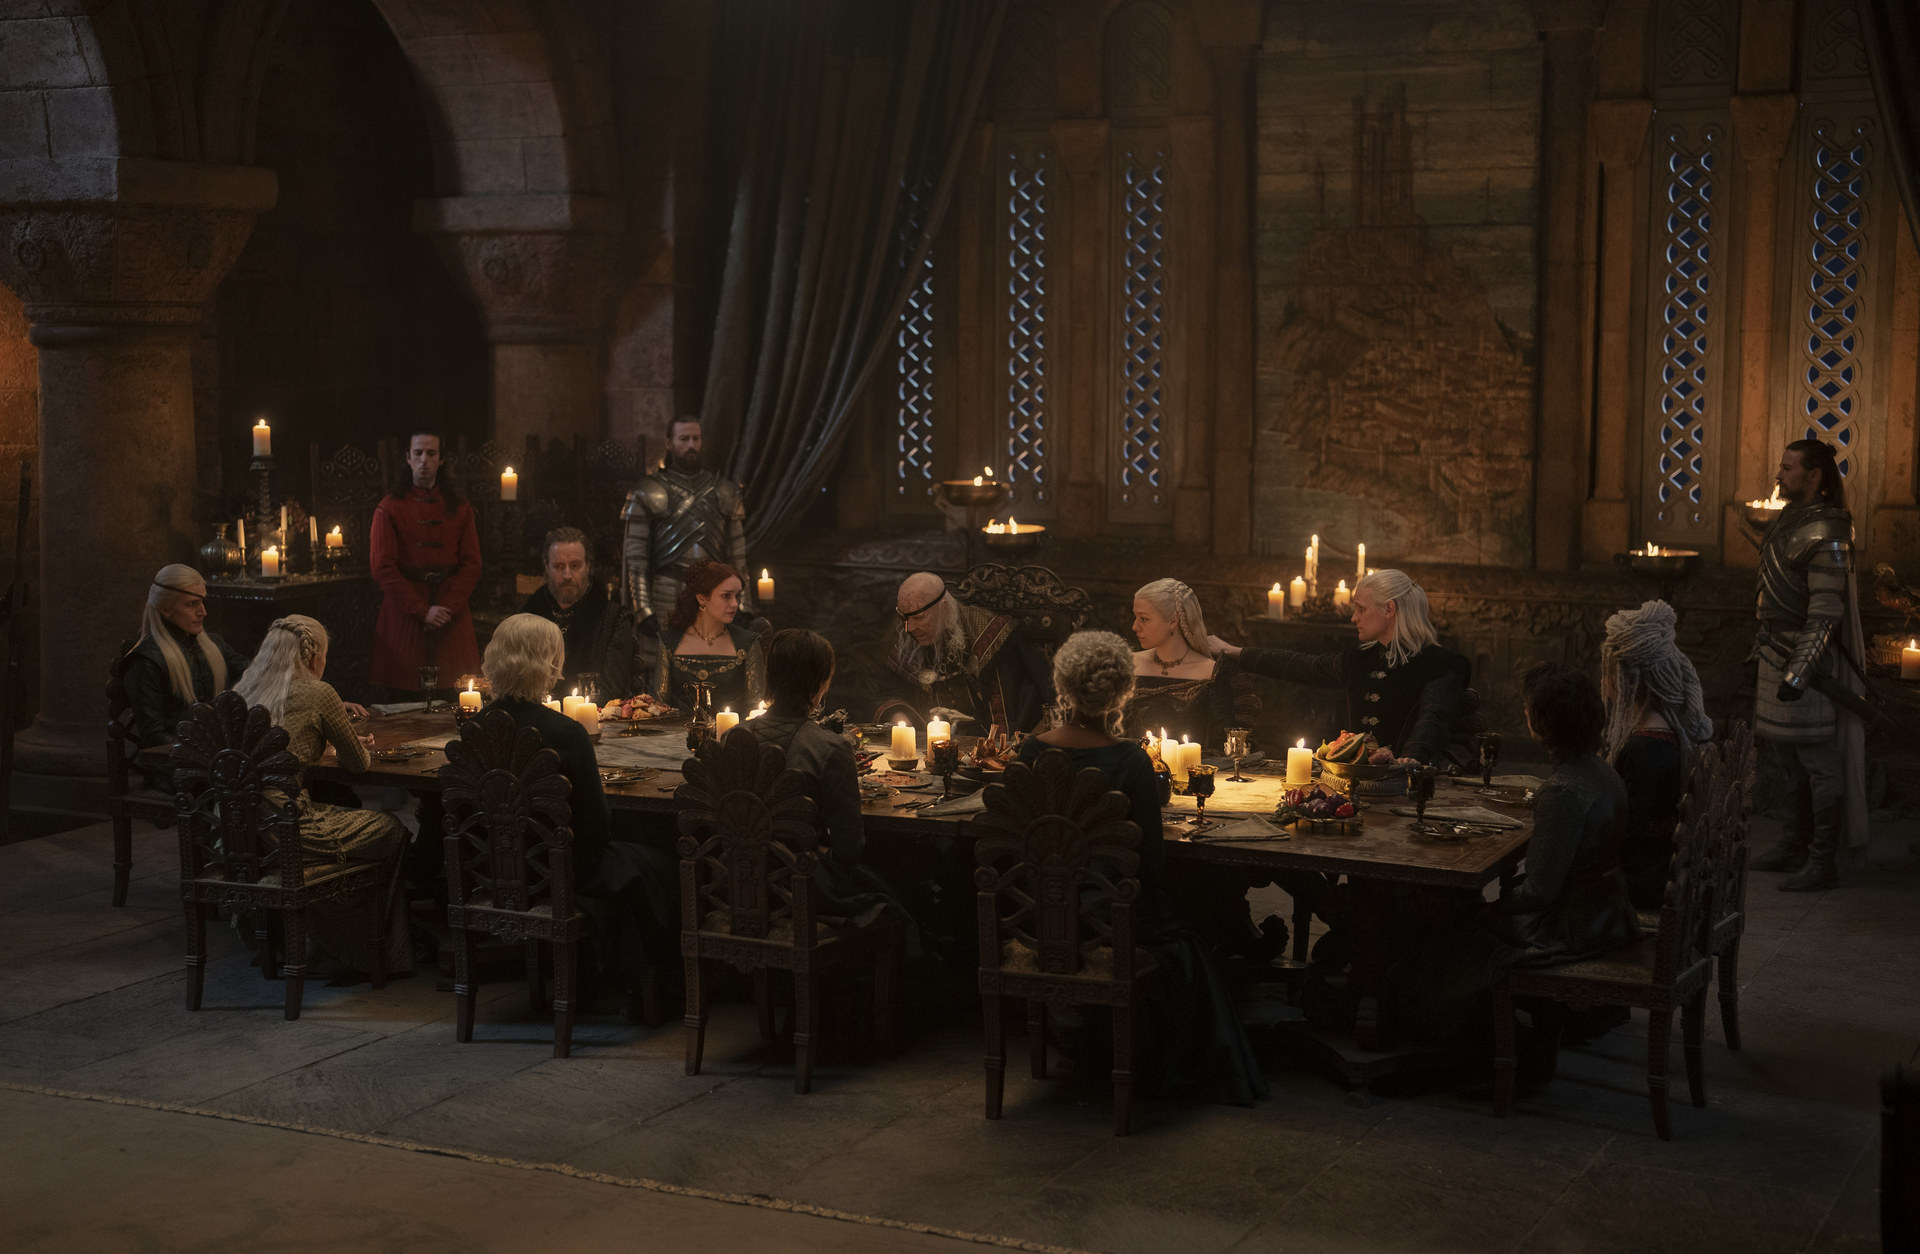 Viserys gathered around a long table for supper with his family